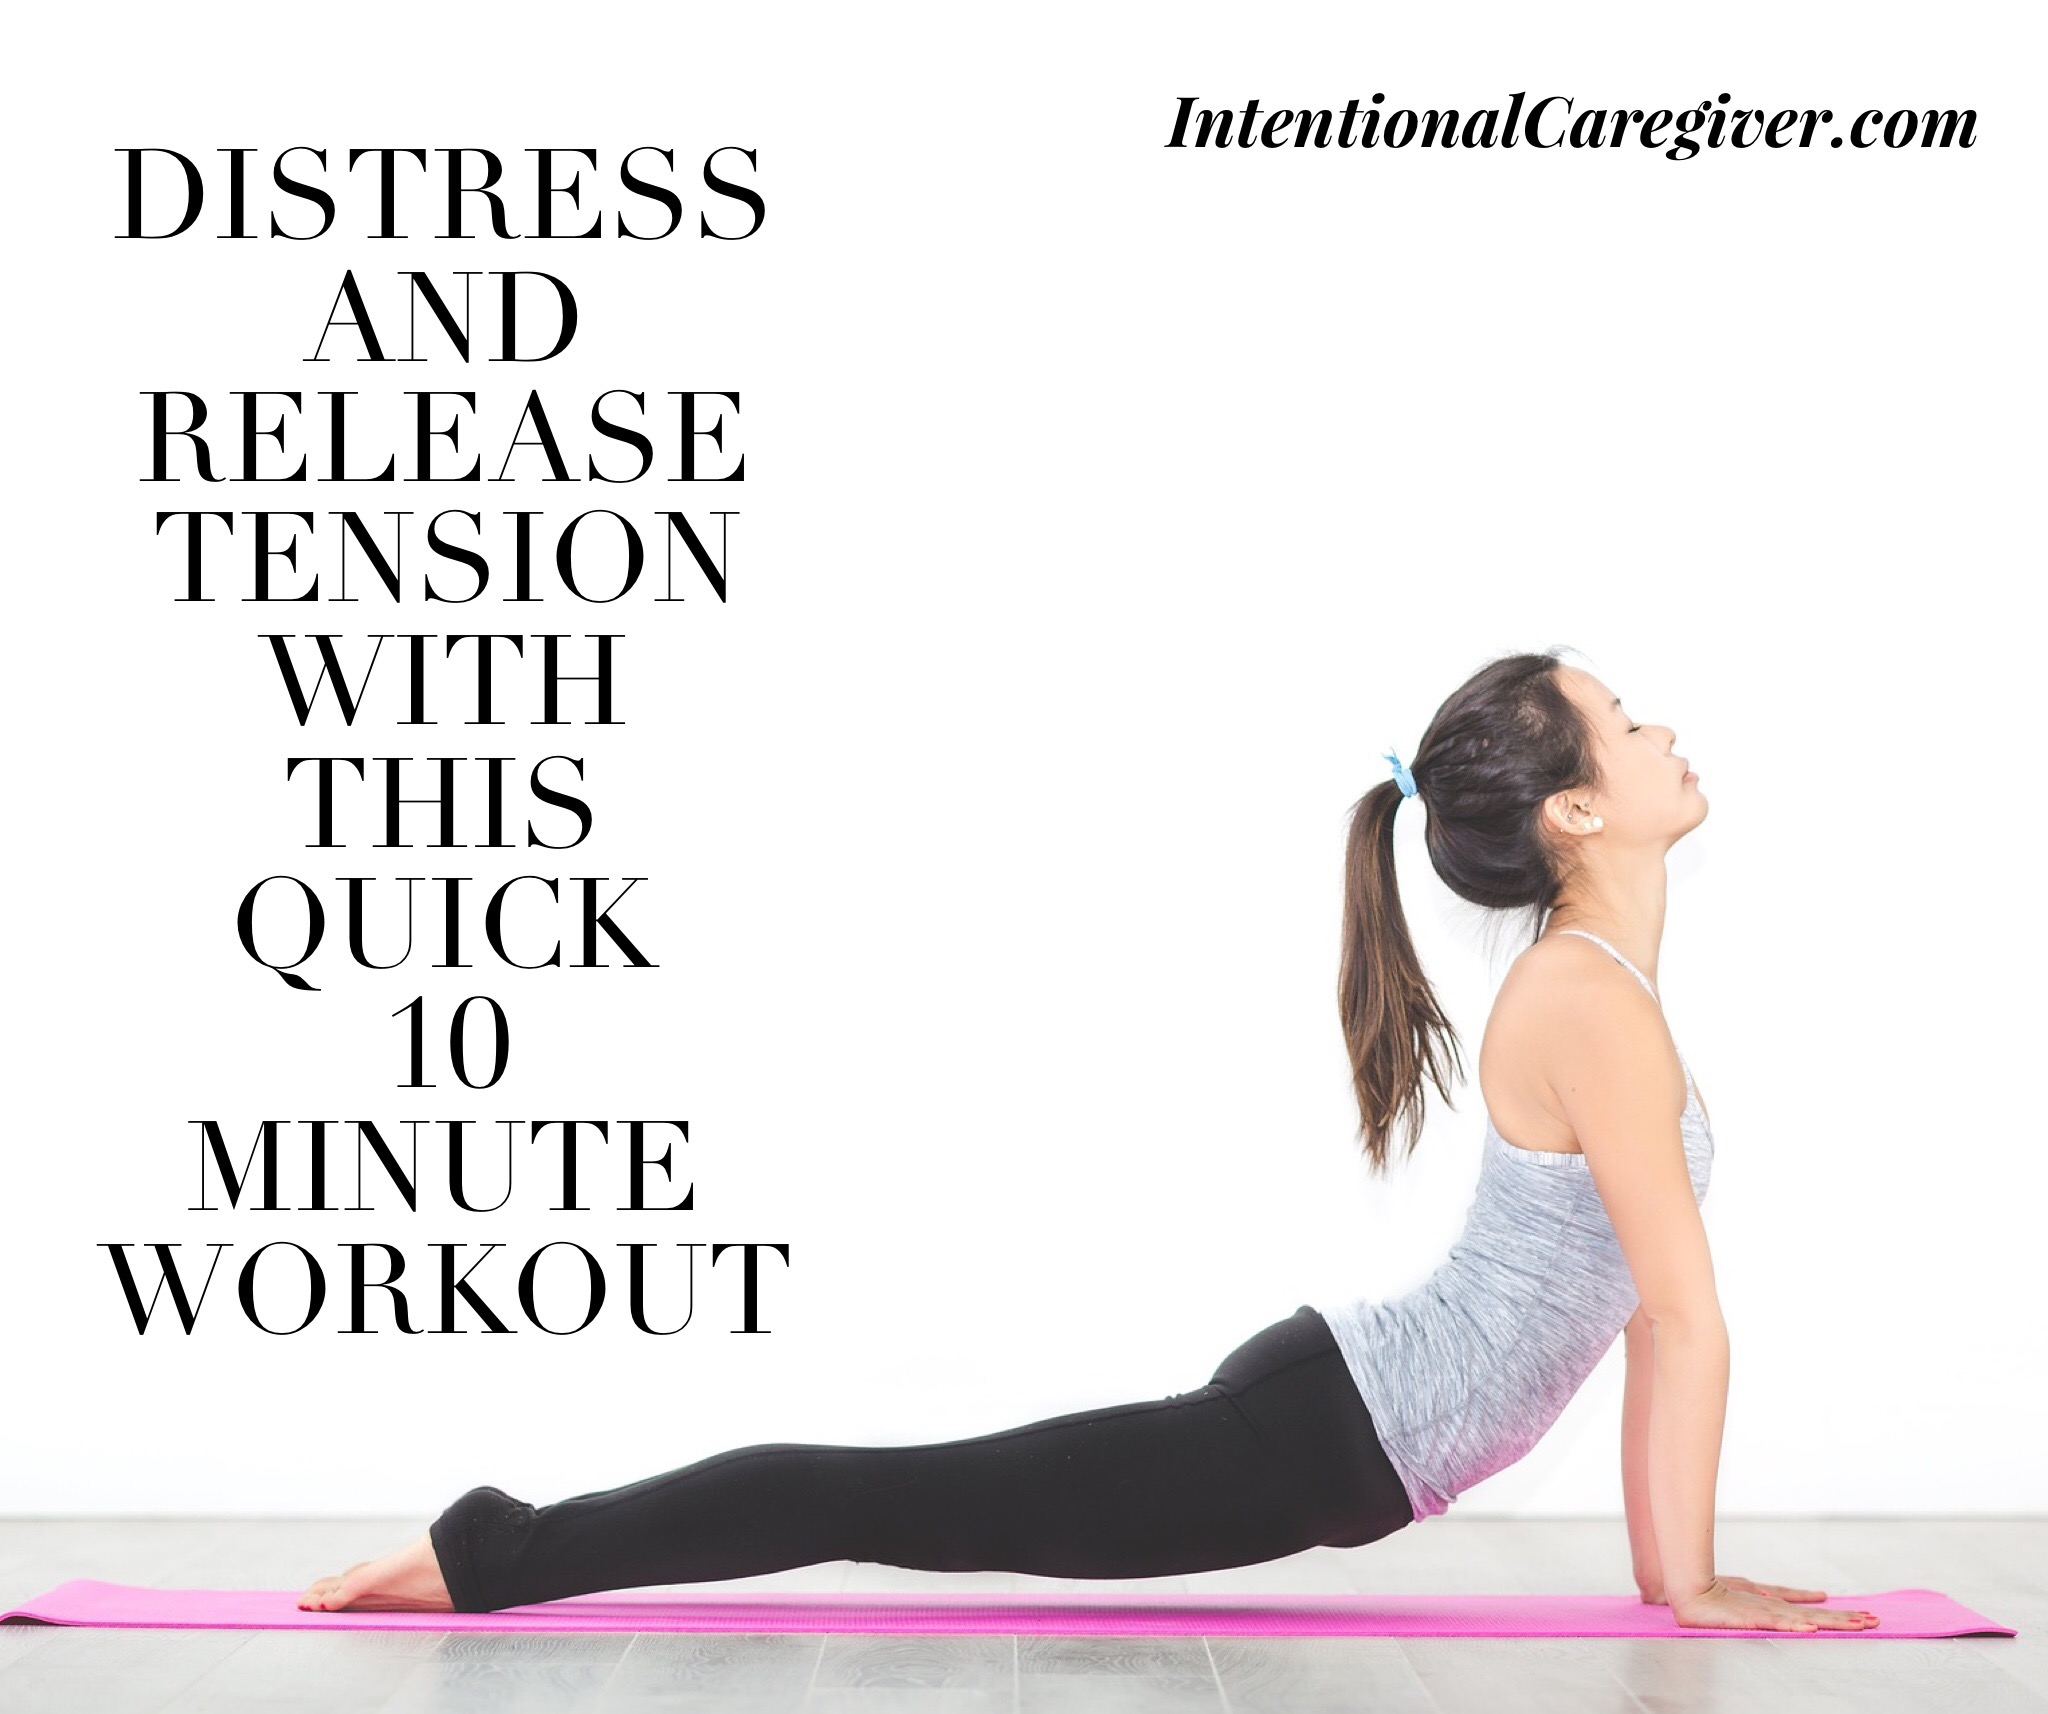 De-stress and Release Tension With This Quick 10-Minute Workout